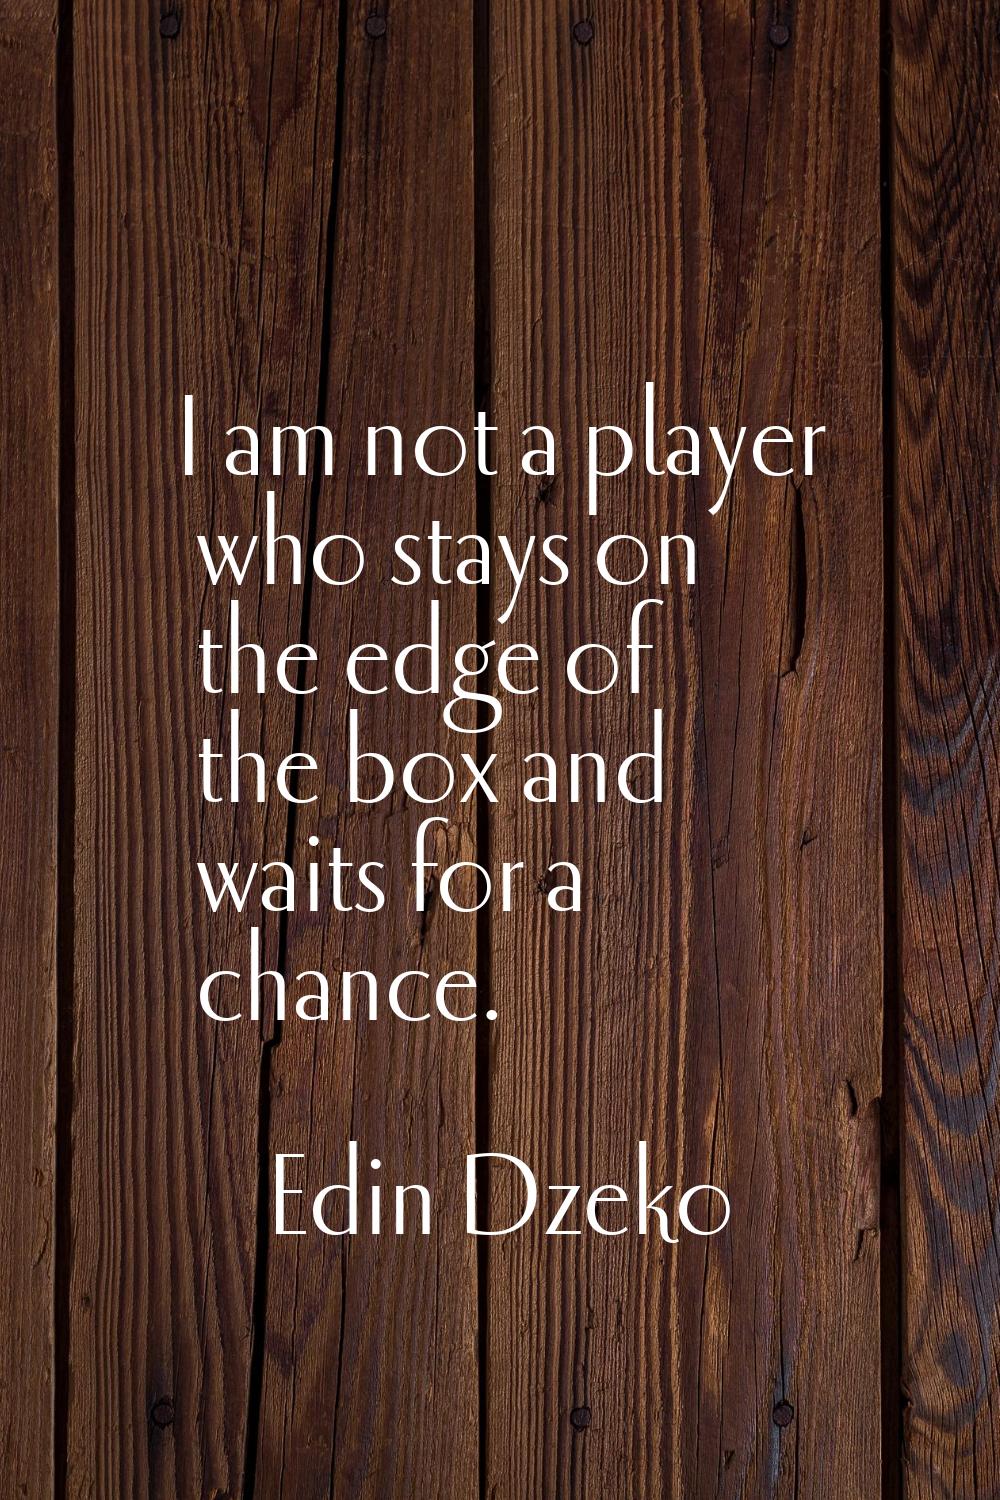 I am not a player who stays on the edge of the box and waits for a chance.